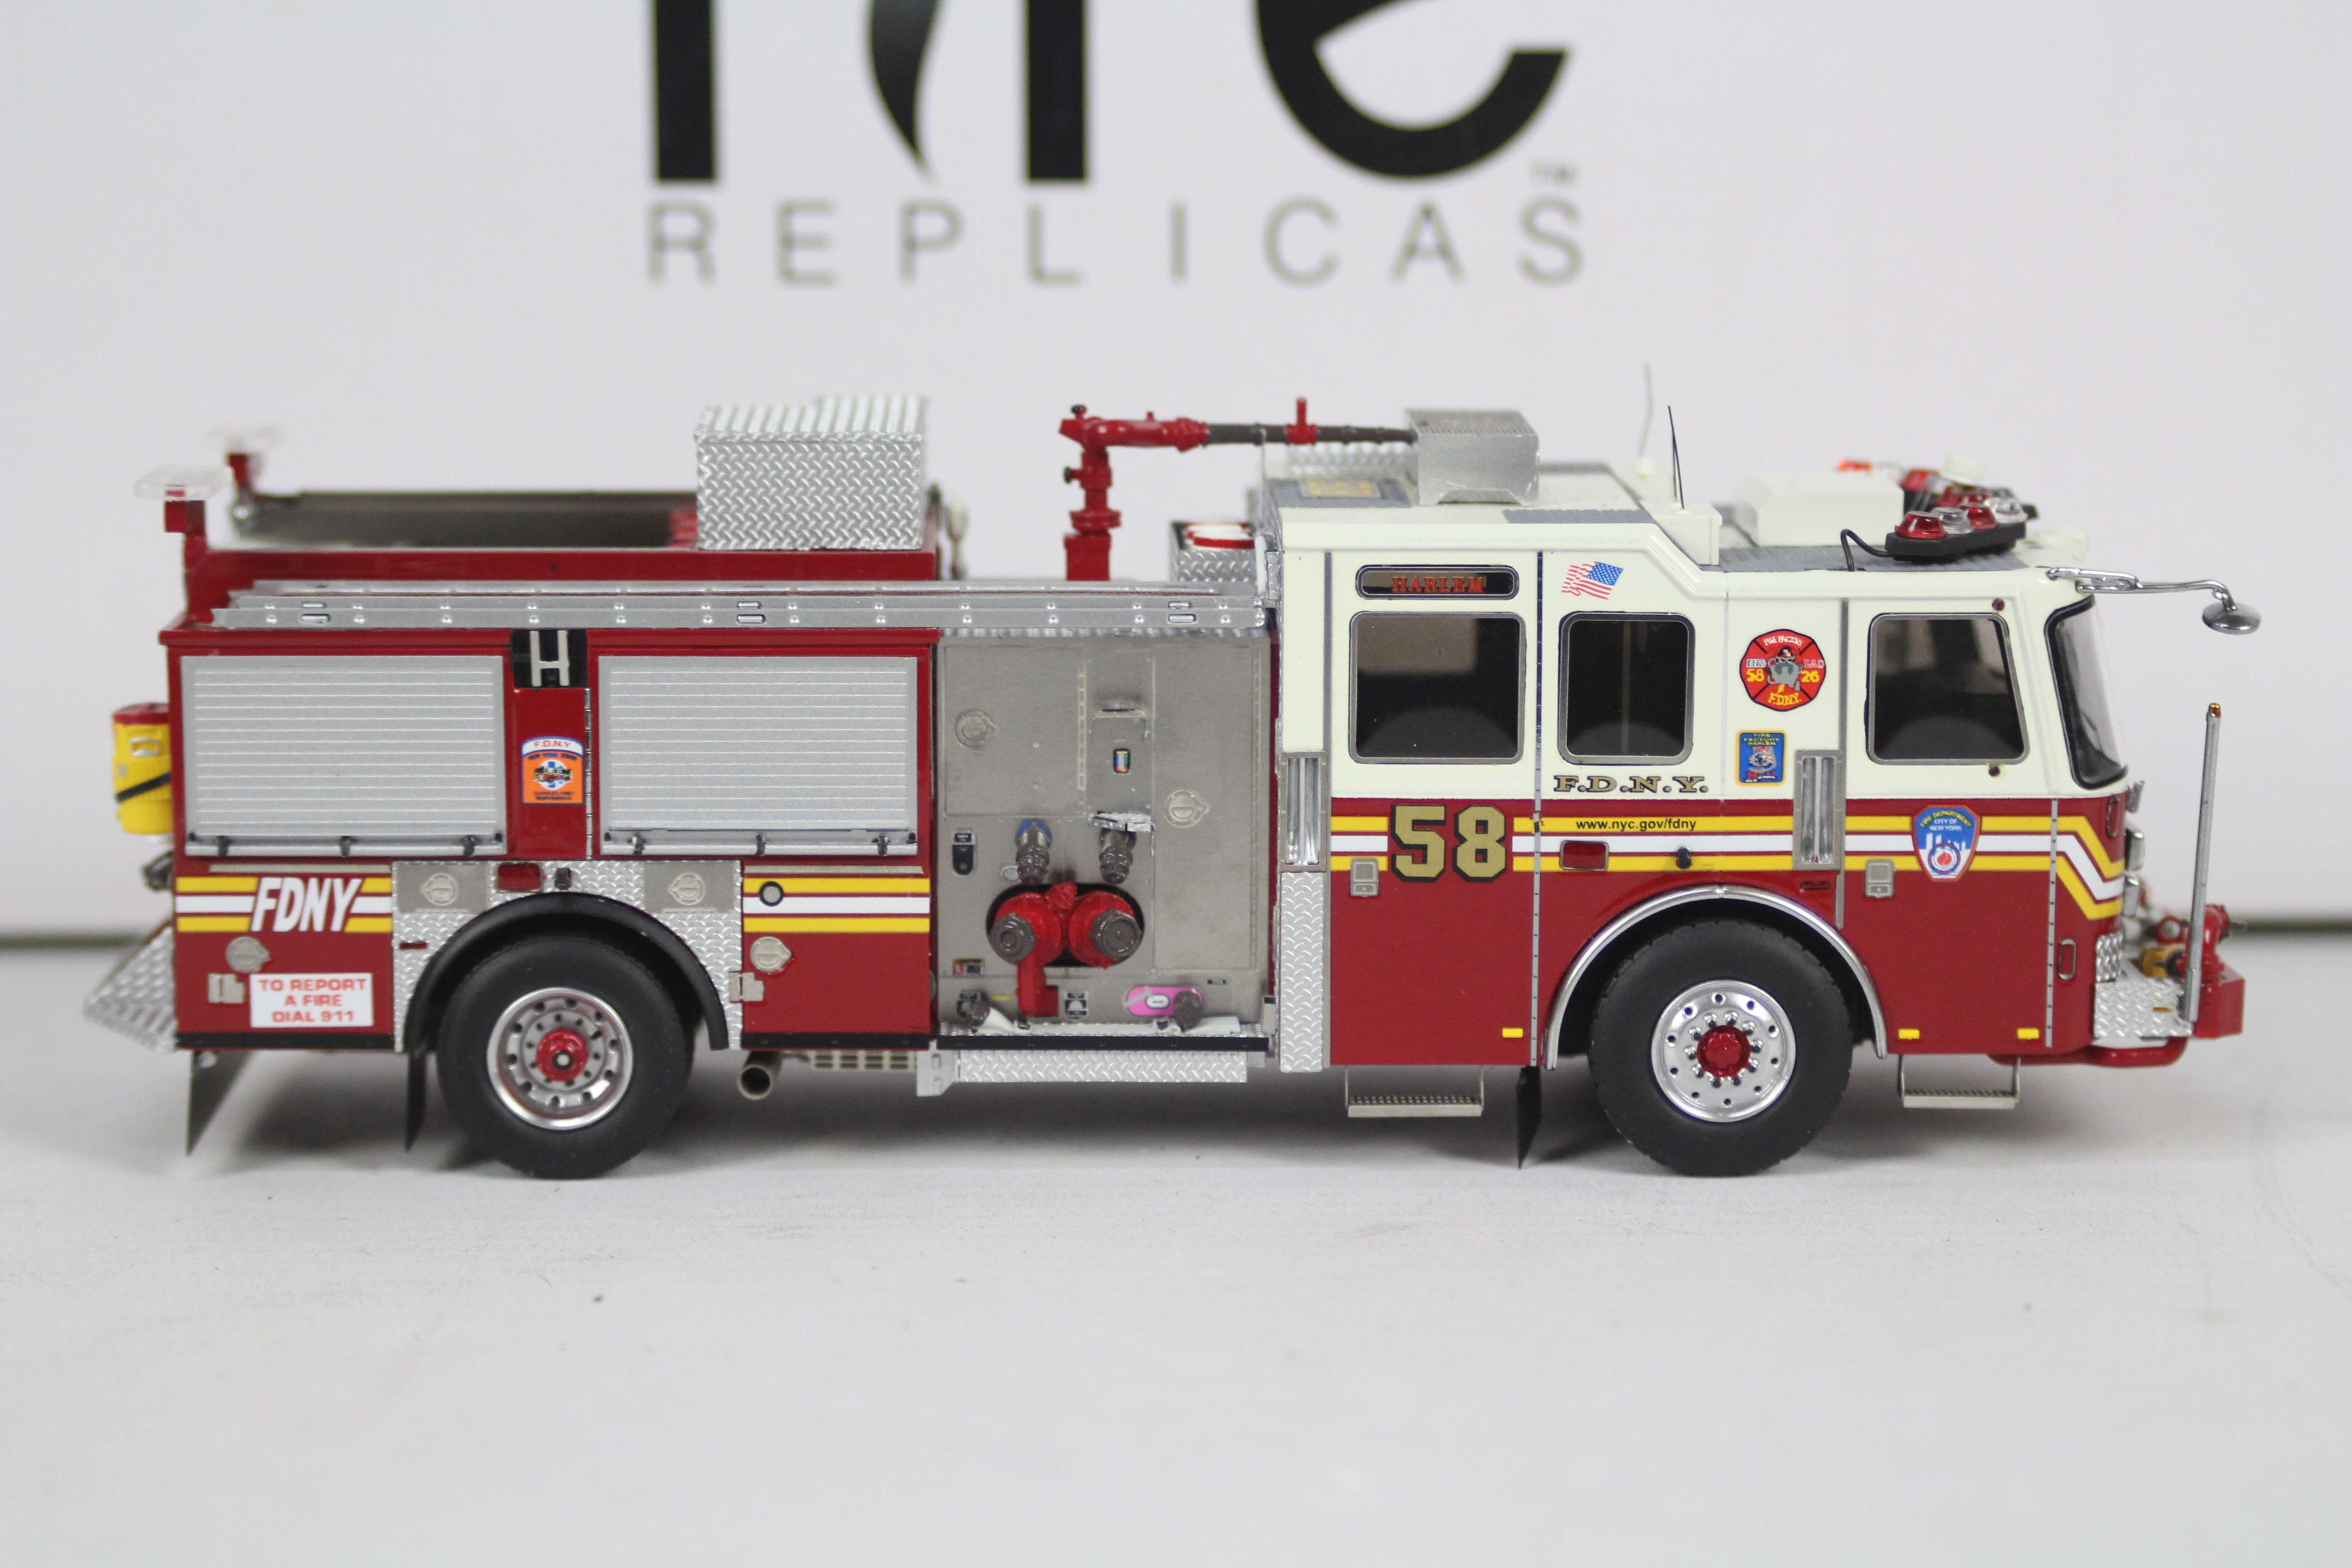 Fire Replicas - A boxed limited edition KME Severe Service Pumper Engine number 58 in FDNY livery - Image 4 of 5